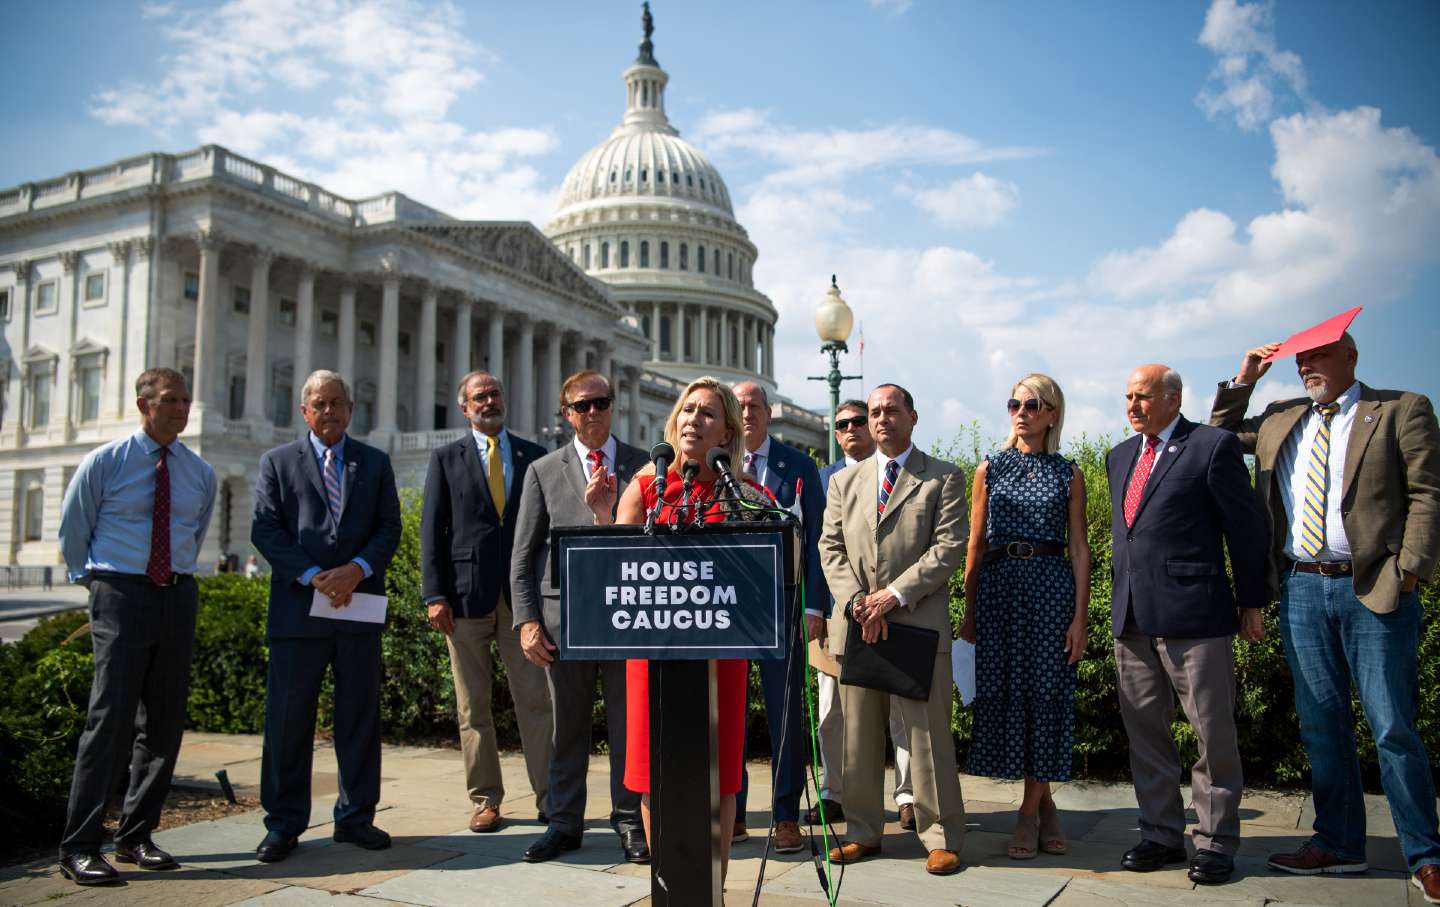 Rep. Marjorie Taylor Greene speaking outside the Capitol during a 2021 House Freedom Caucus news conference. From left to right behind her are Reps. Scott Perry, Ralph Norman, Andy Harris, Randy Weber, Dan Bishop, Andrew Clyde, Bob Good, Mary Miller, Louie Gohmert, and Chip Roy.